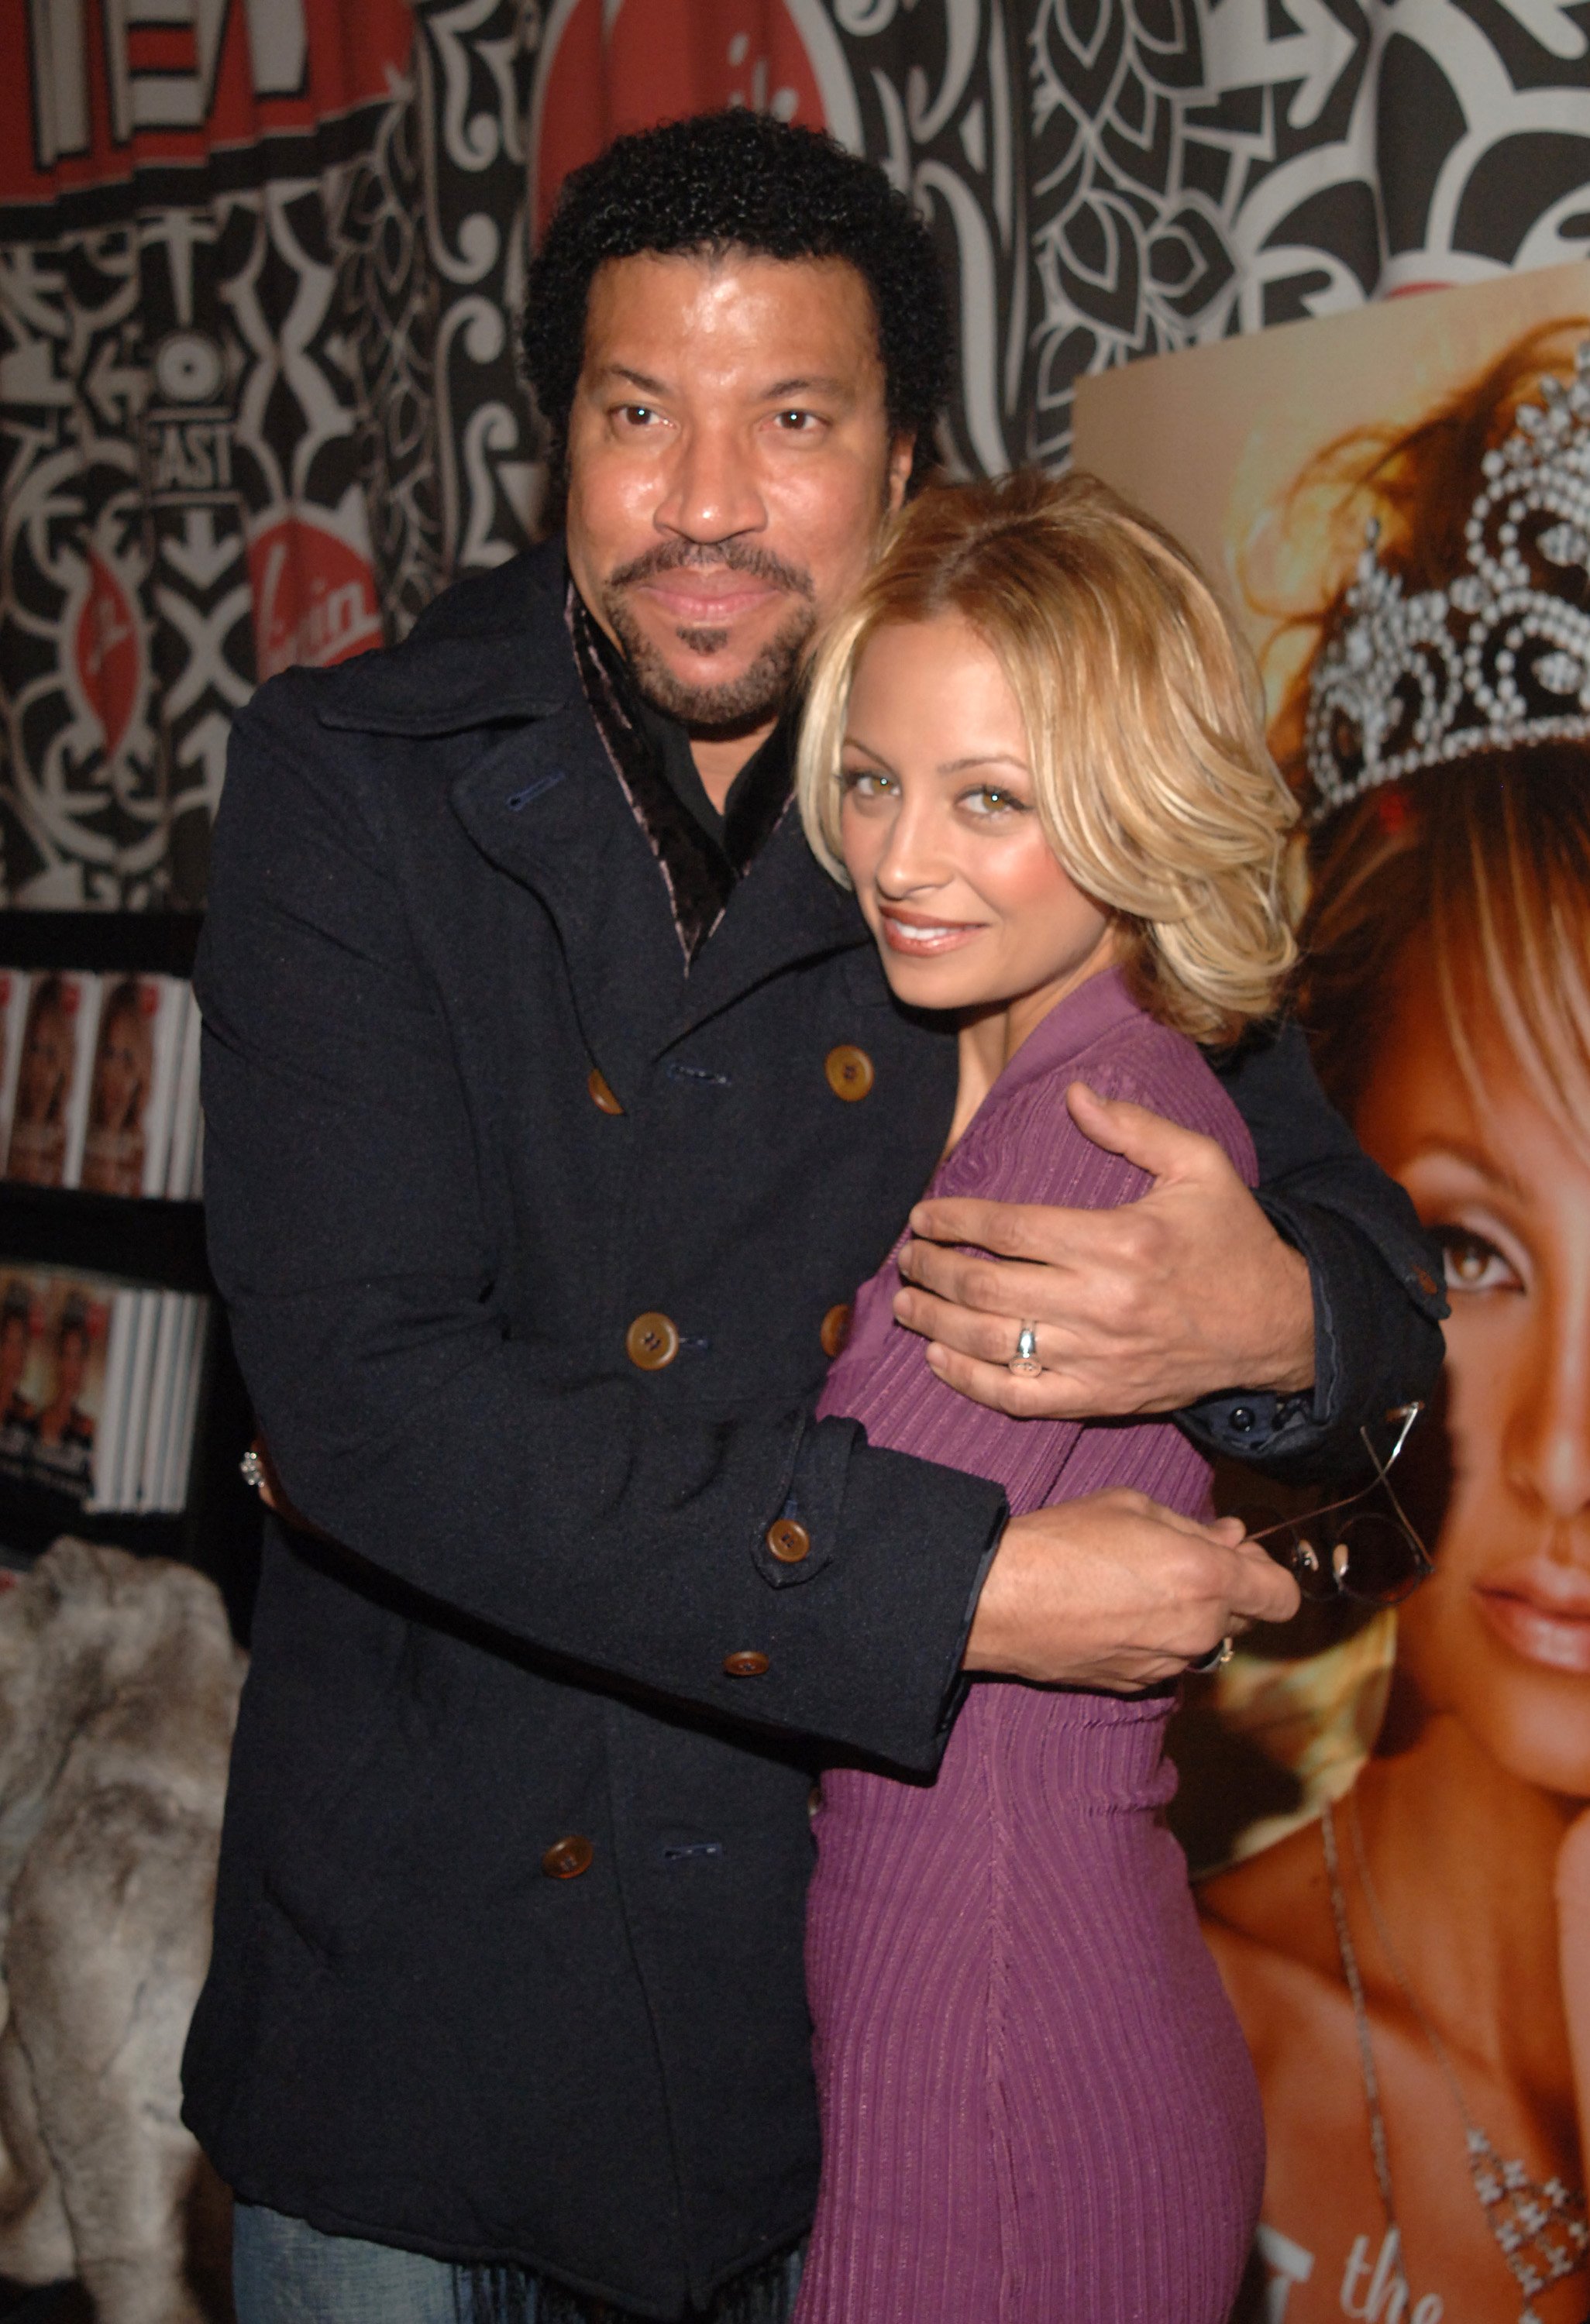 Nicole Richie and Lionel Richie in New York 2005 | Source: Getty Images